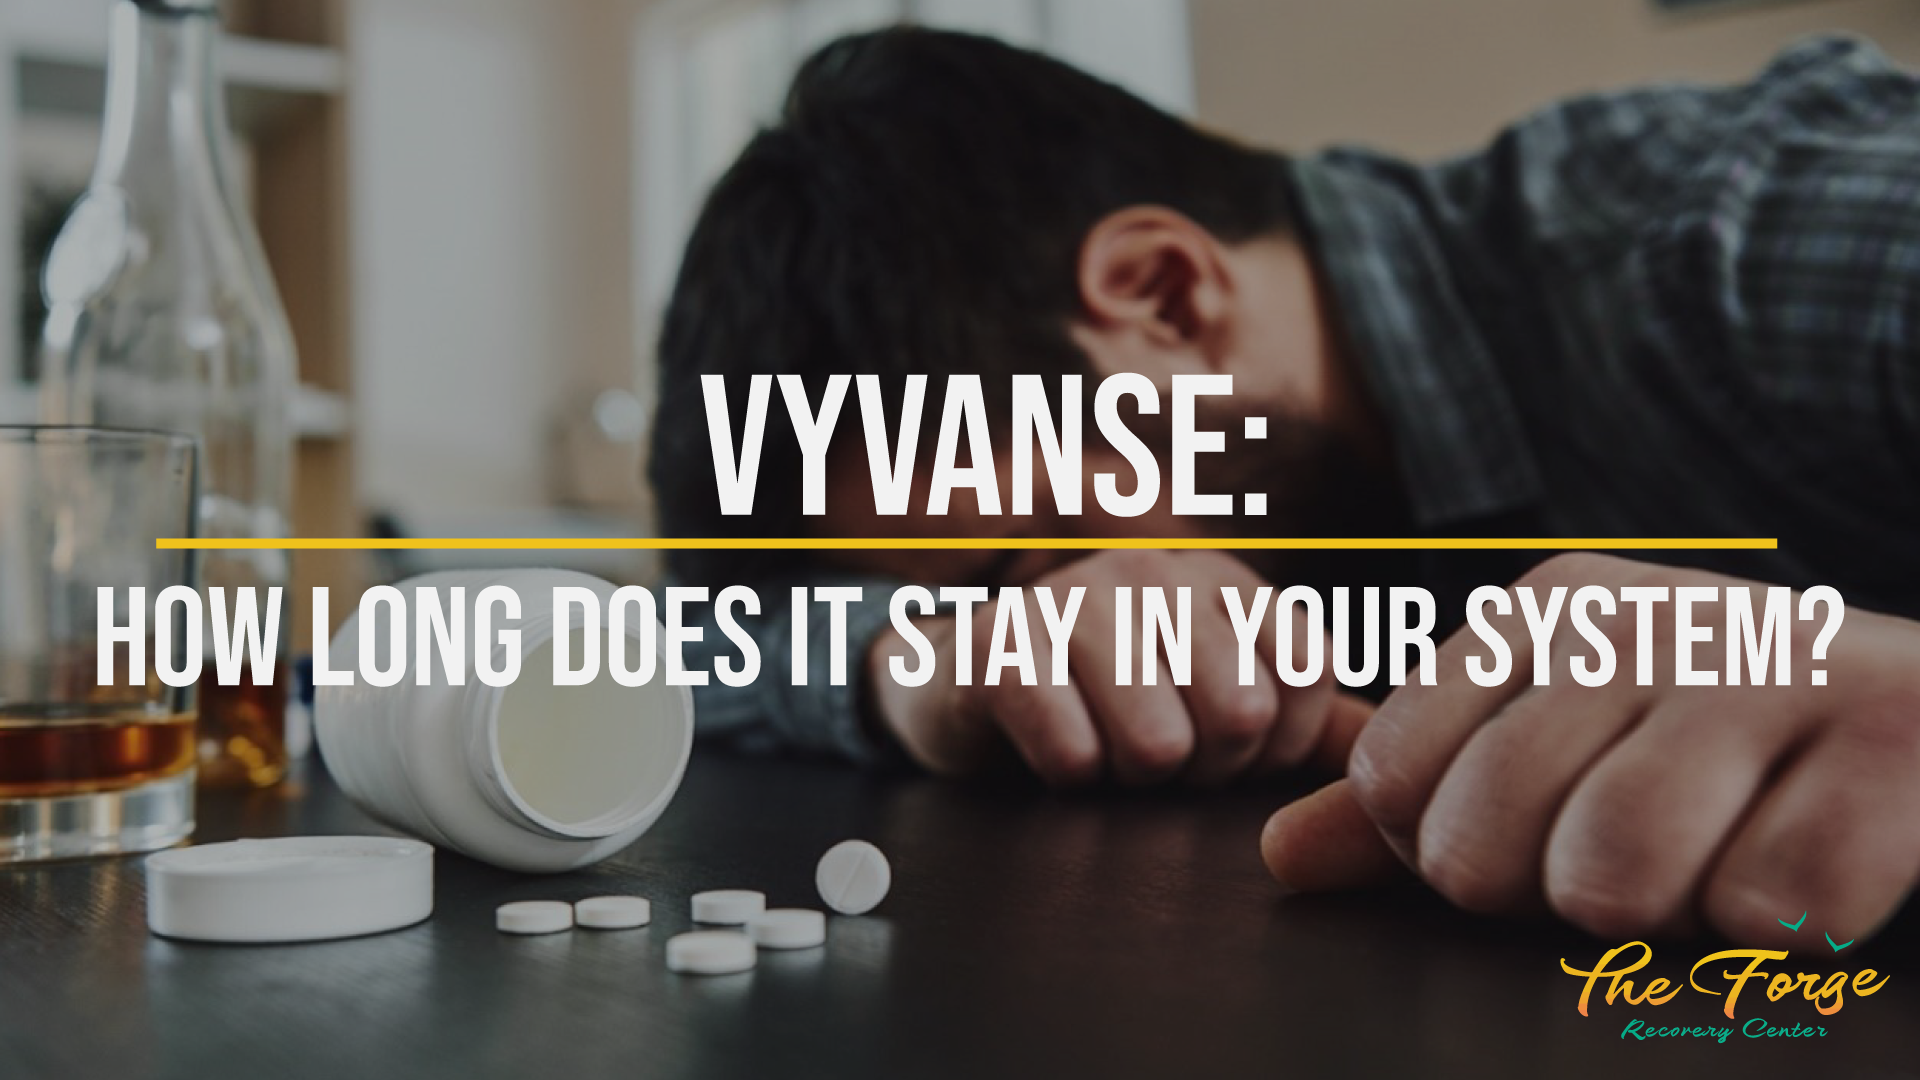 Vyvanse: The Half-Life & More About This Popular ADHD Medication